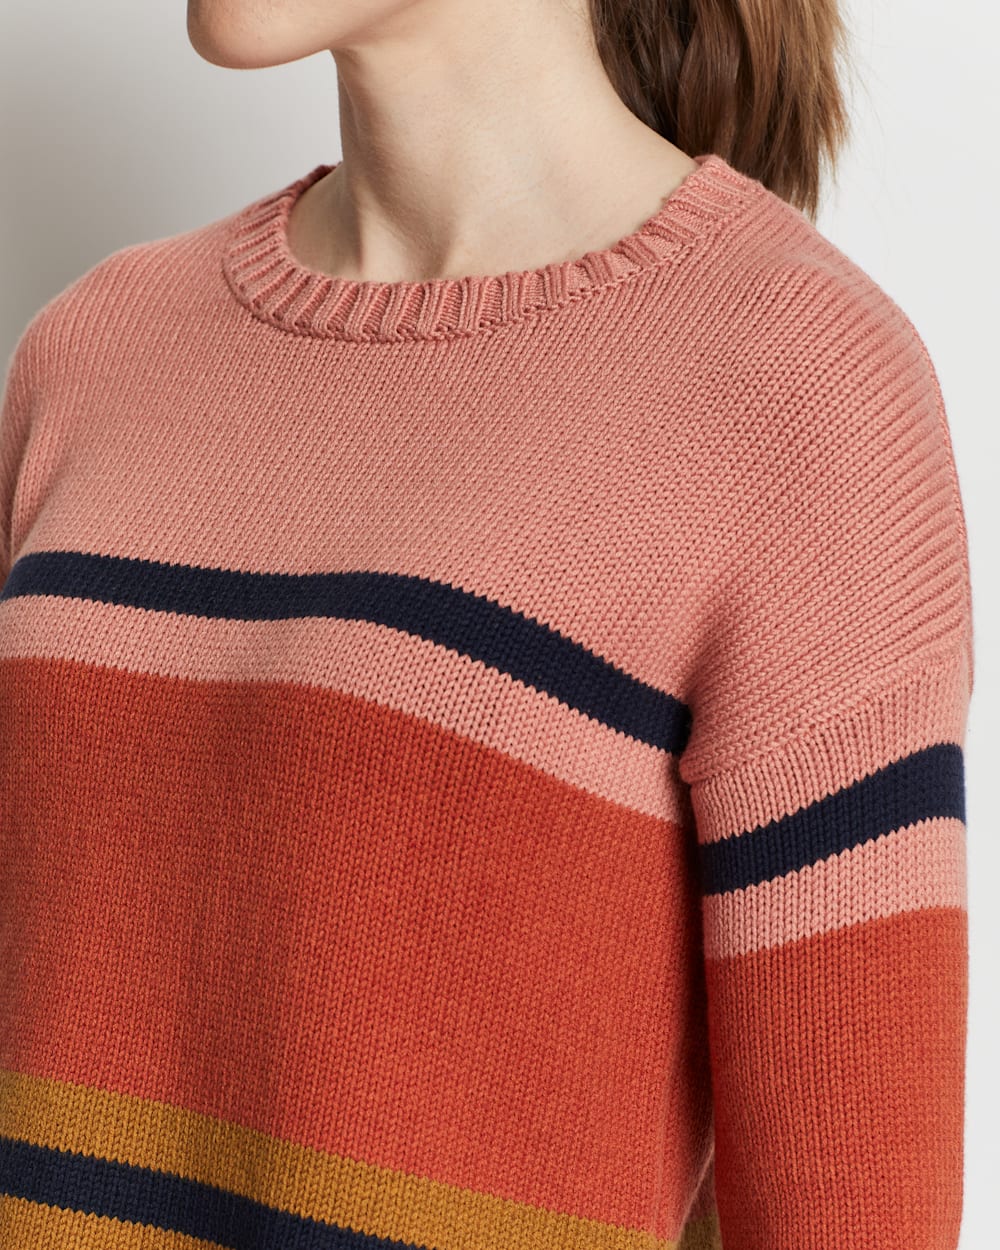 ALTERNATE VIEW OF WOMEN'S RELAXED-FIT STRIPE PULLOVER IN PEANUT/CORAL MULTI image number 4